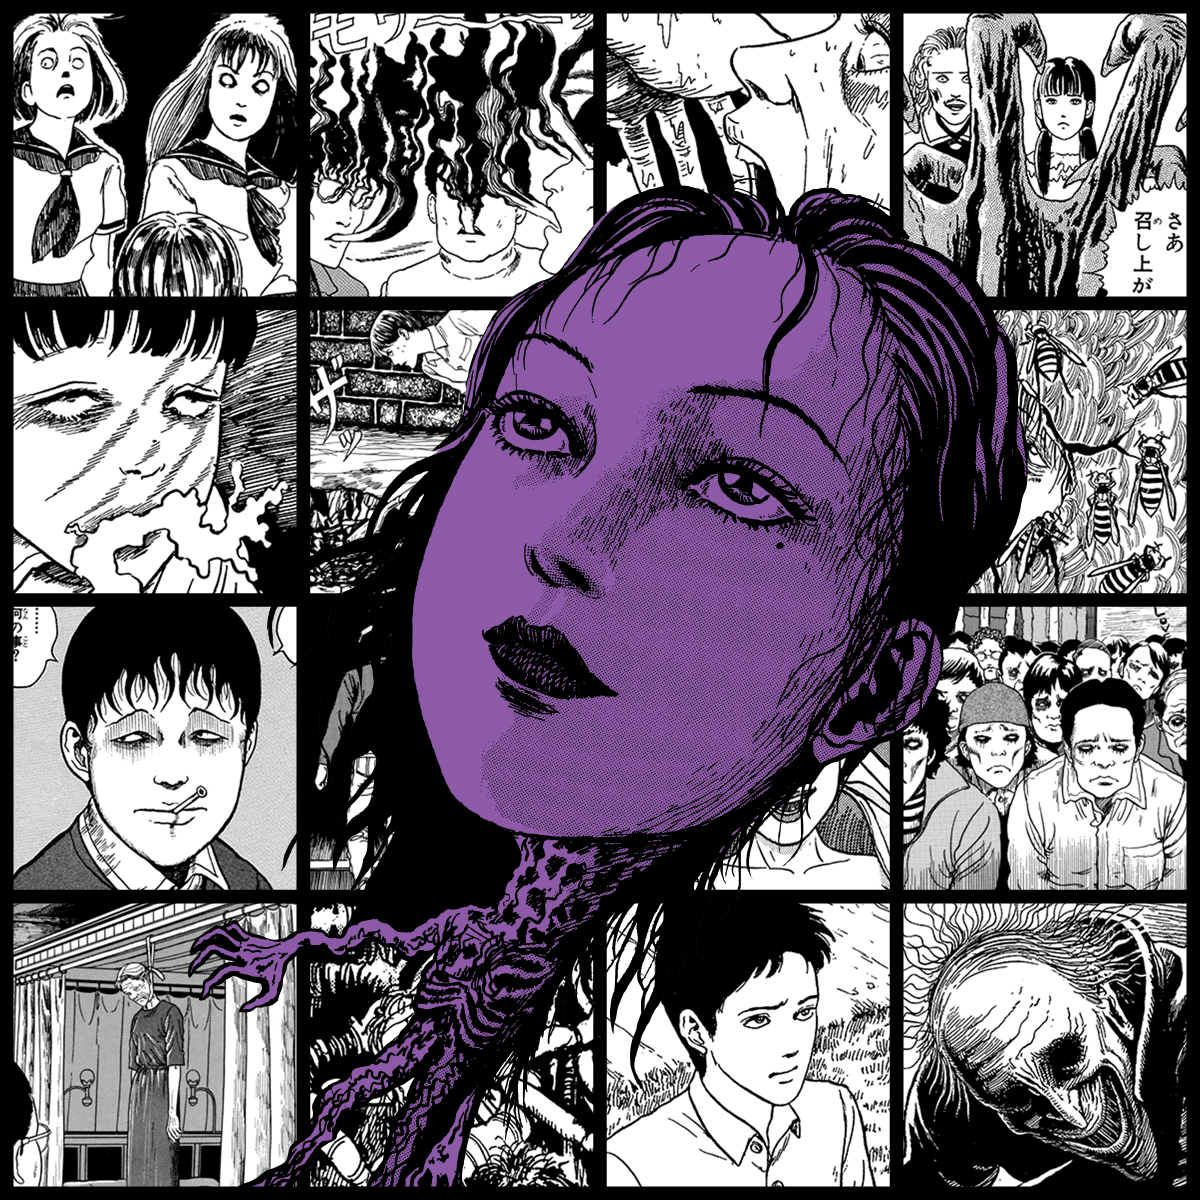 TOMIE by Junji Ito #1669